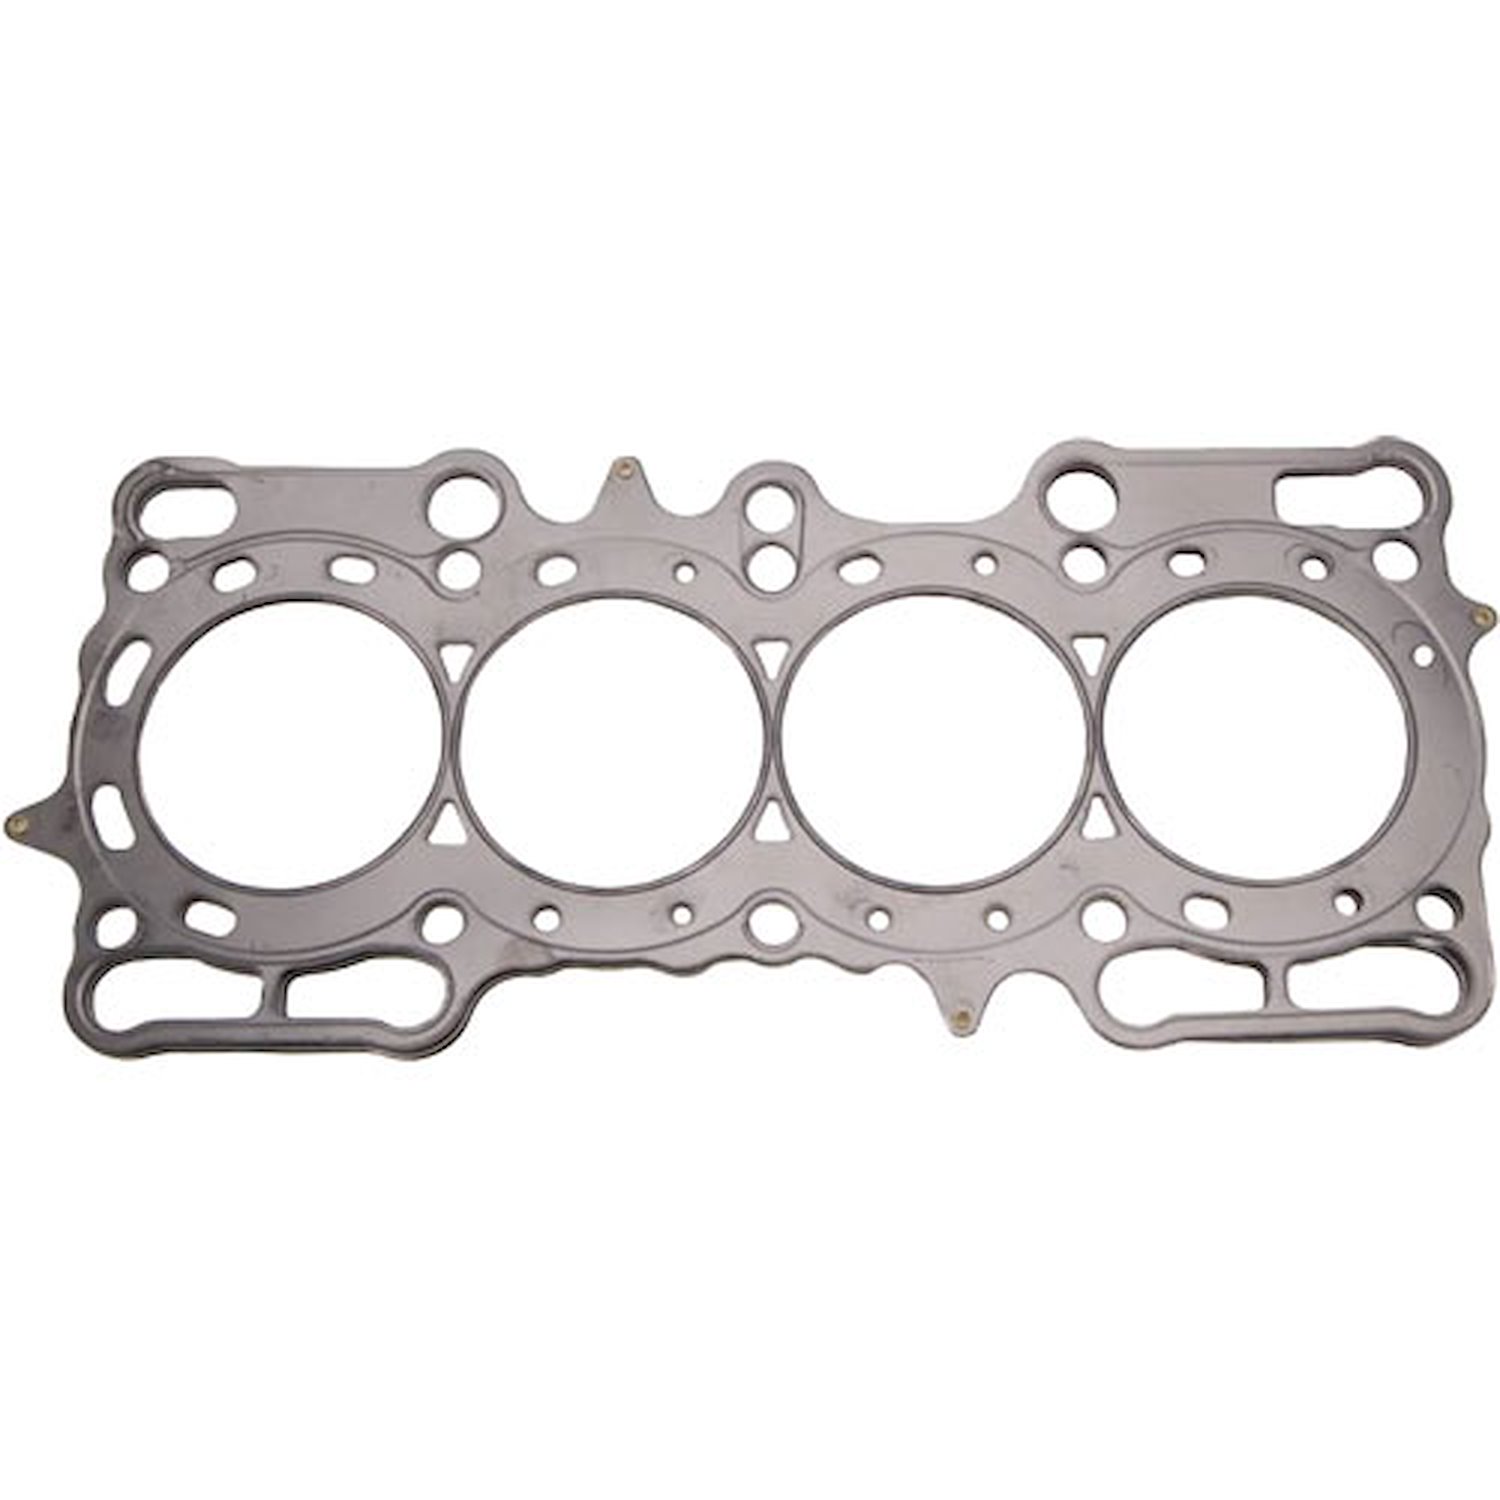 Head Gasket for 1997-2001 Honda Prelude with H22A4,